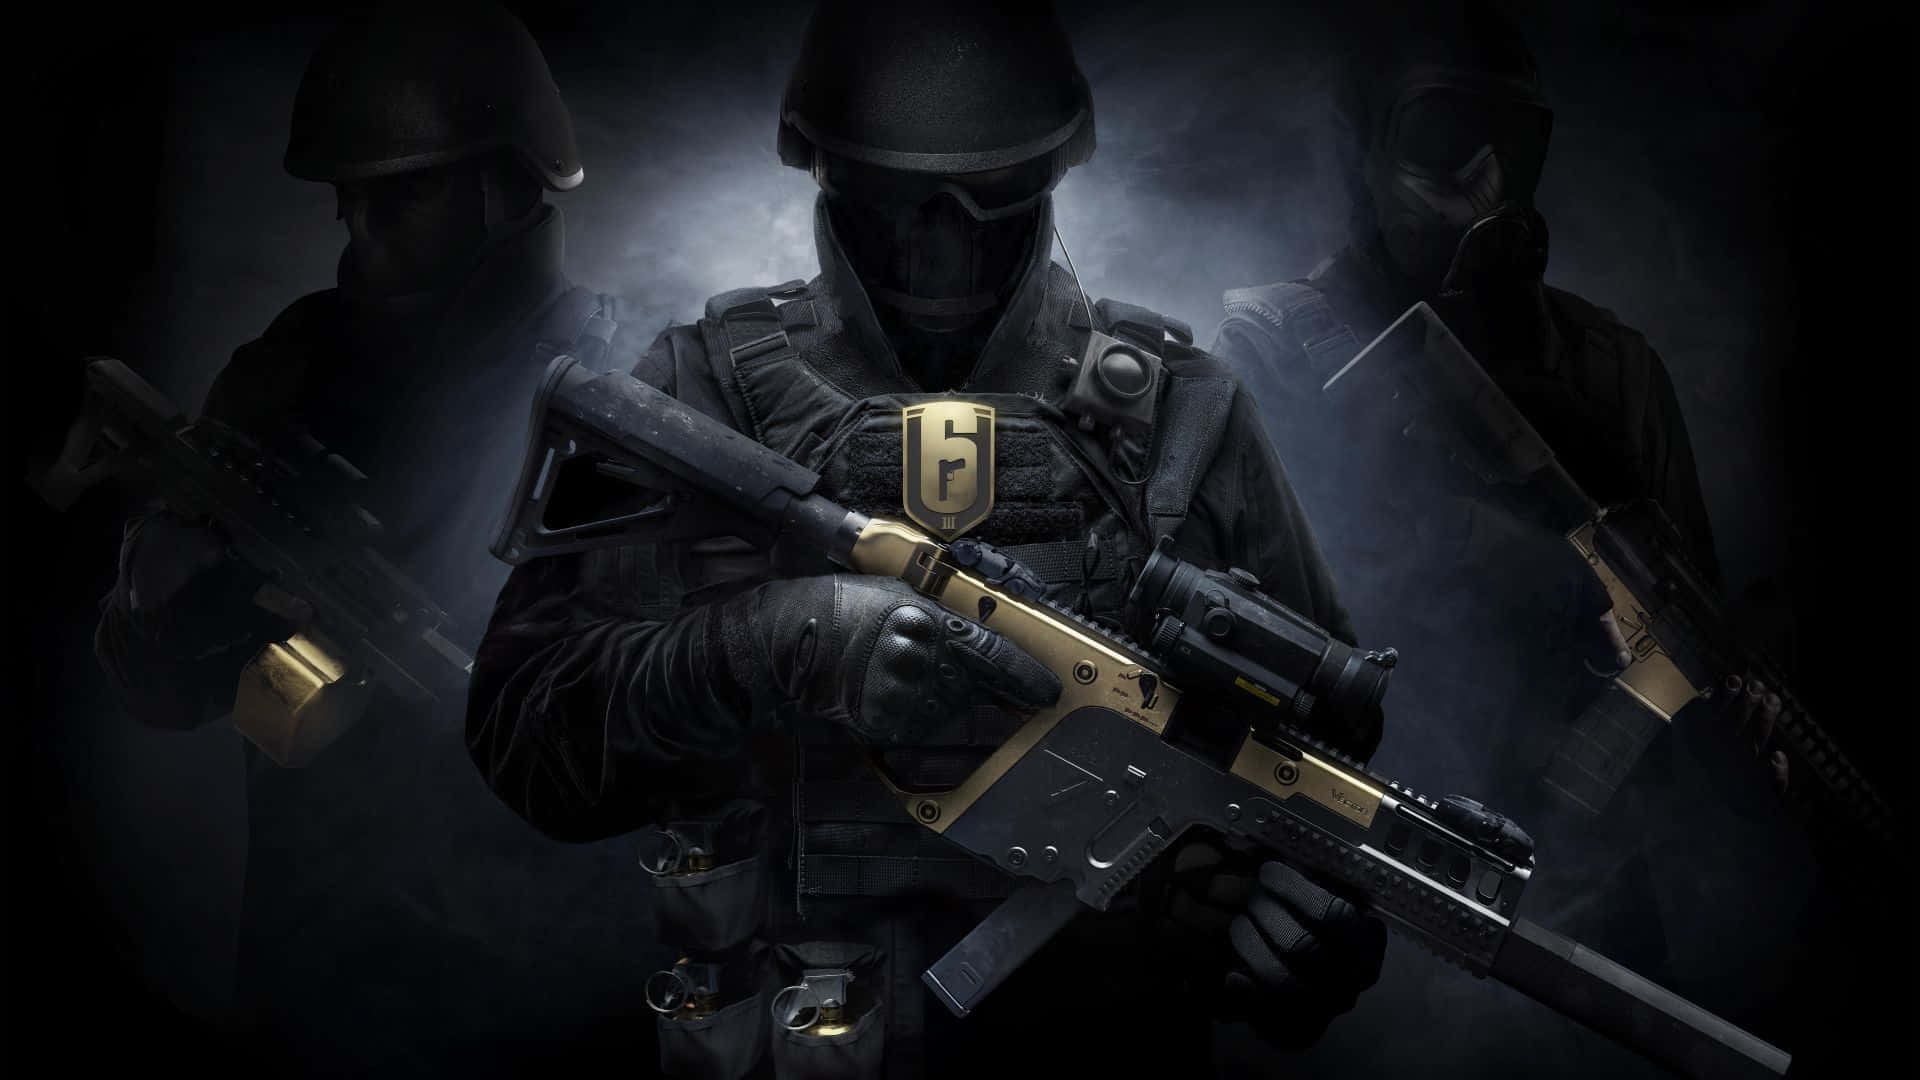 A Group Of Soldiers Holding Guns In The Dark Wallpaper